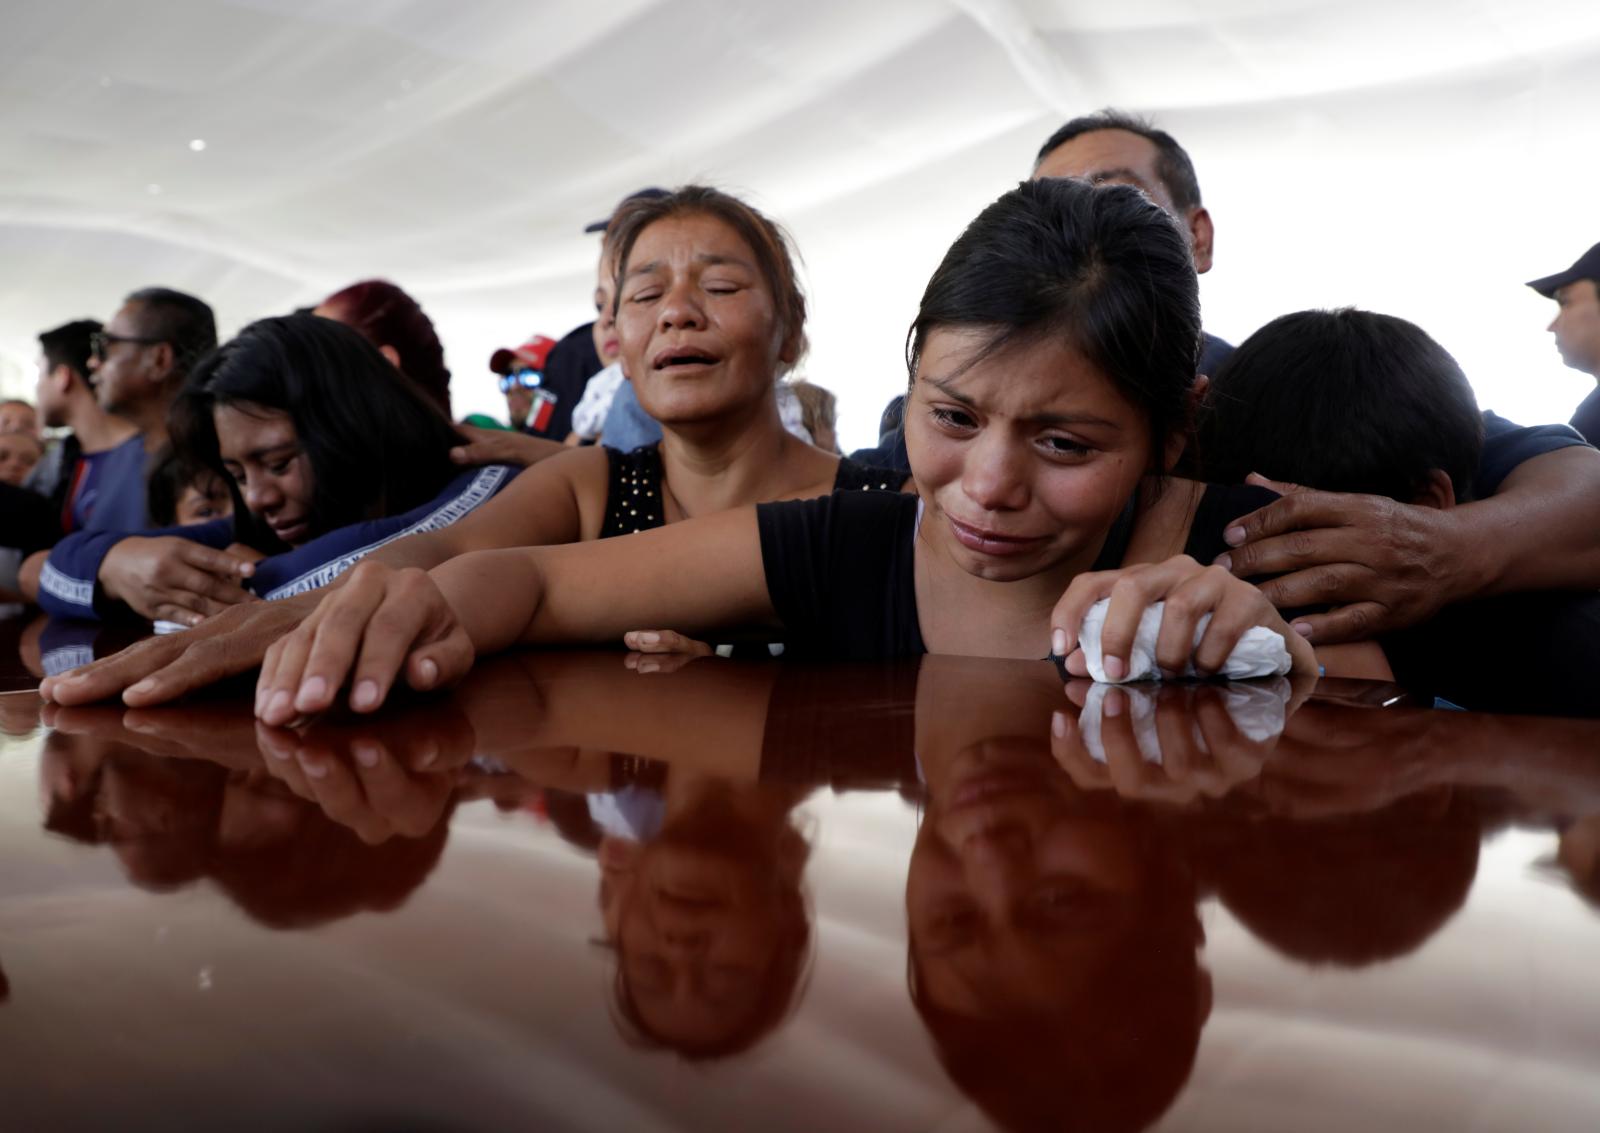 Relatives of a police officer, who was killed along with other fellow police officers during an ambush by suspected cartel hitmen, react during an homage organised by the state government, in Morelia, in Michoacan state, Mexico October 15, 2019. REUTERS/Alan Ortega